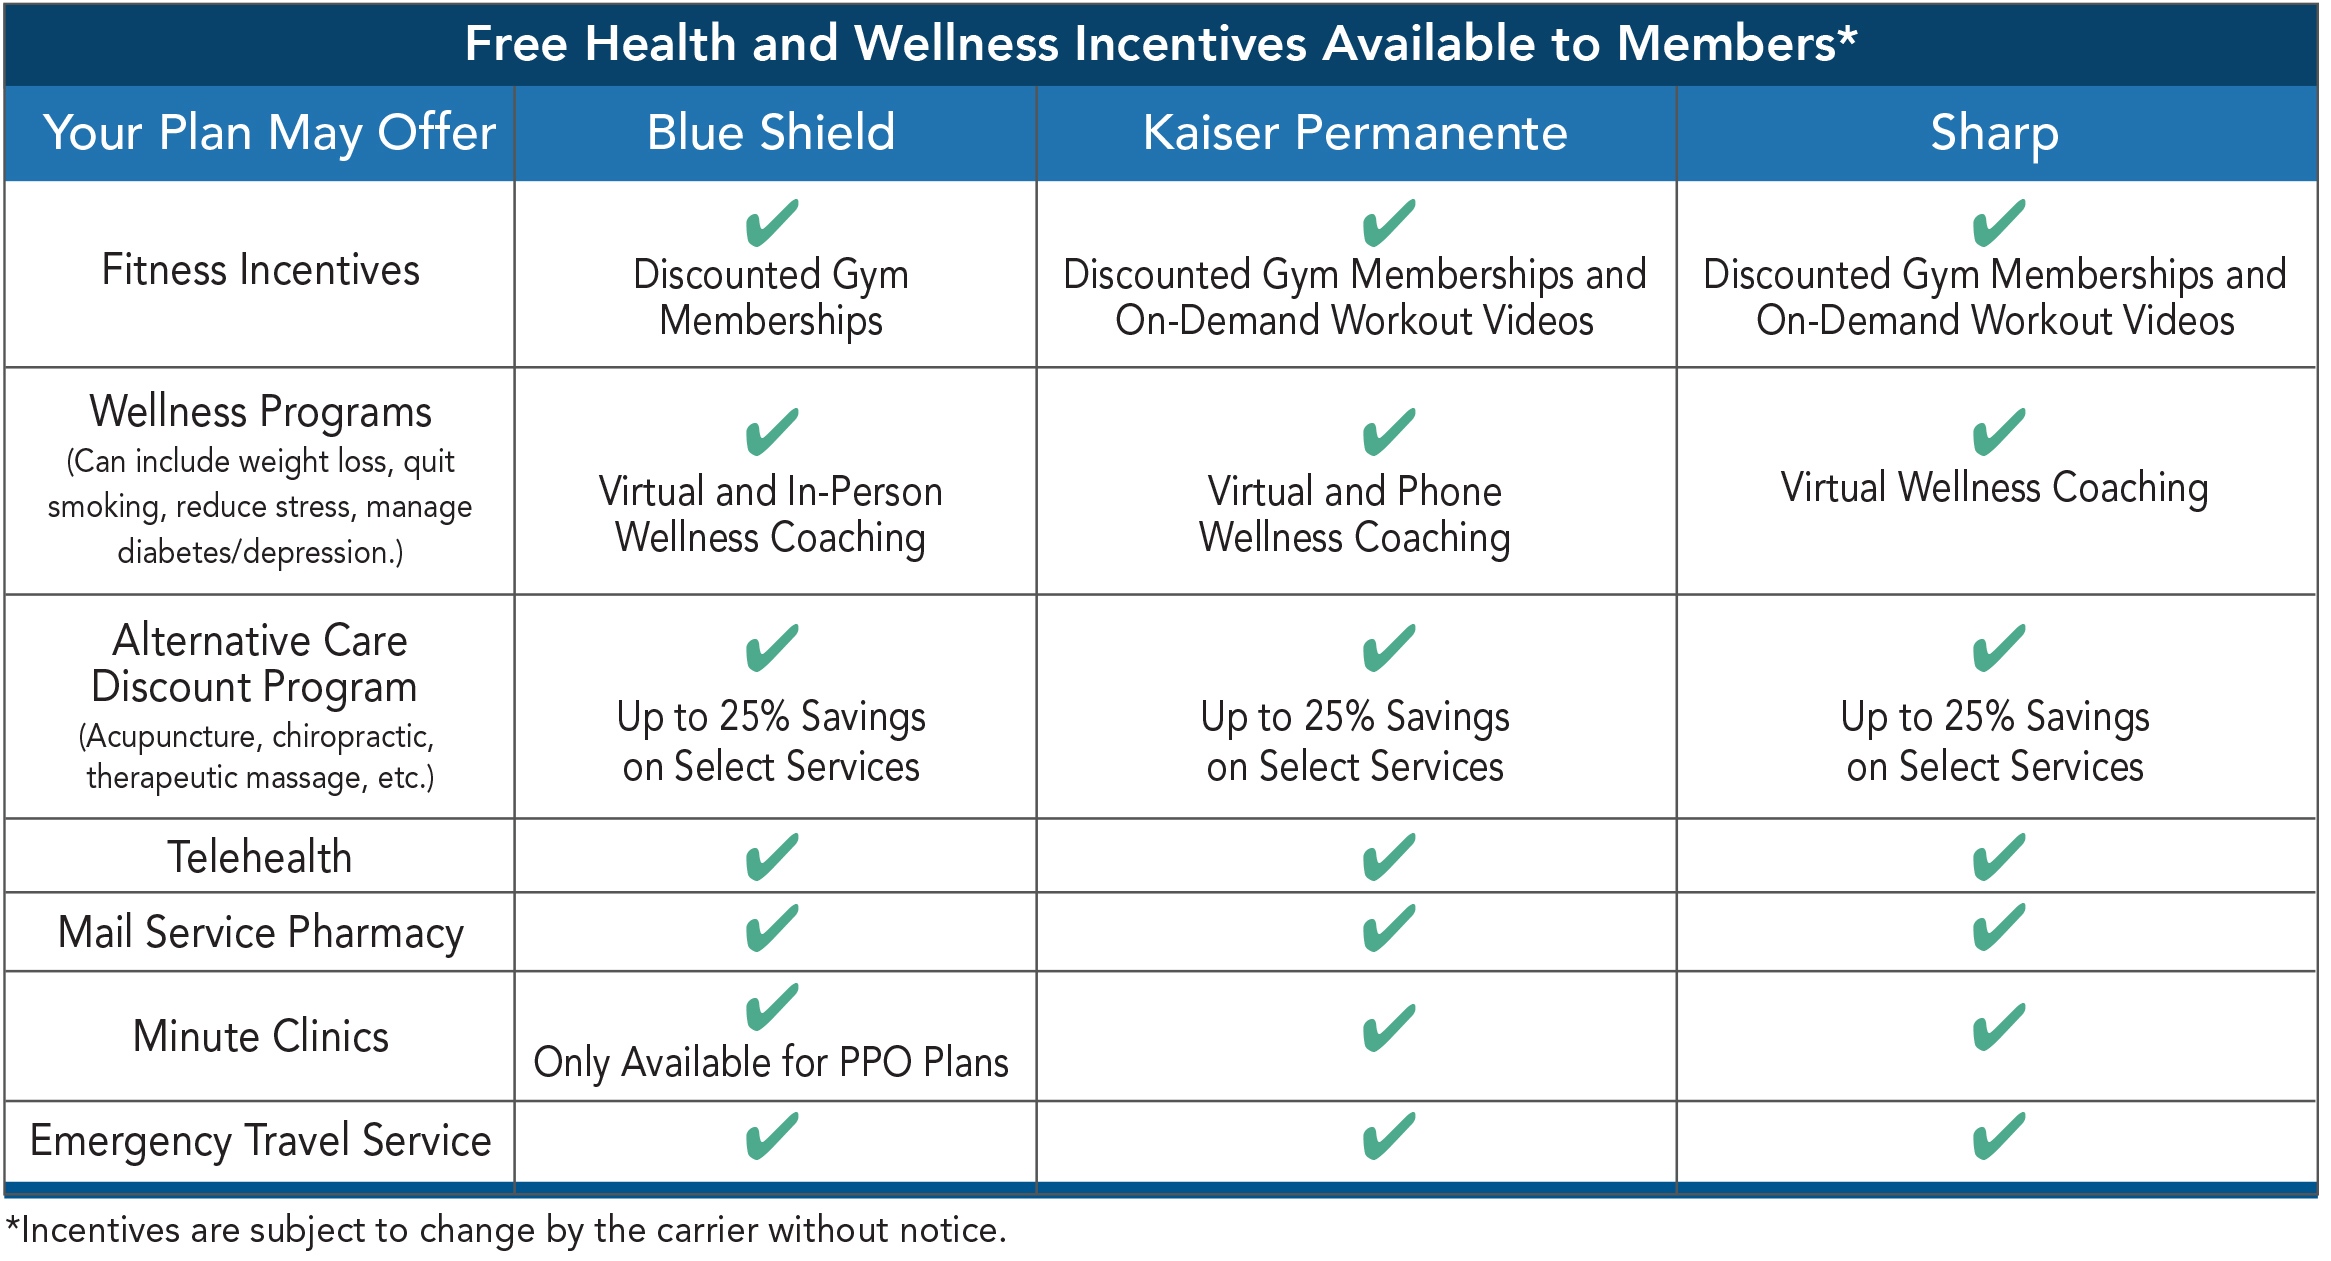 CCSB: Free Health and Wellness Incentives